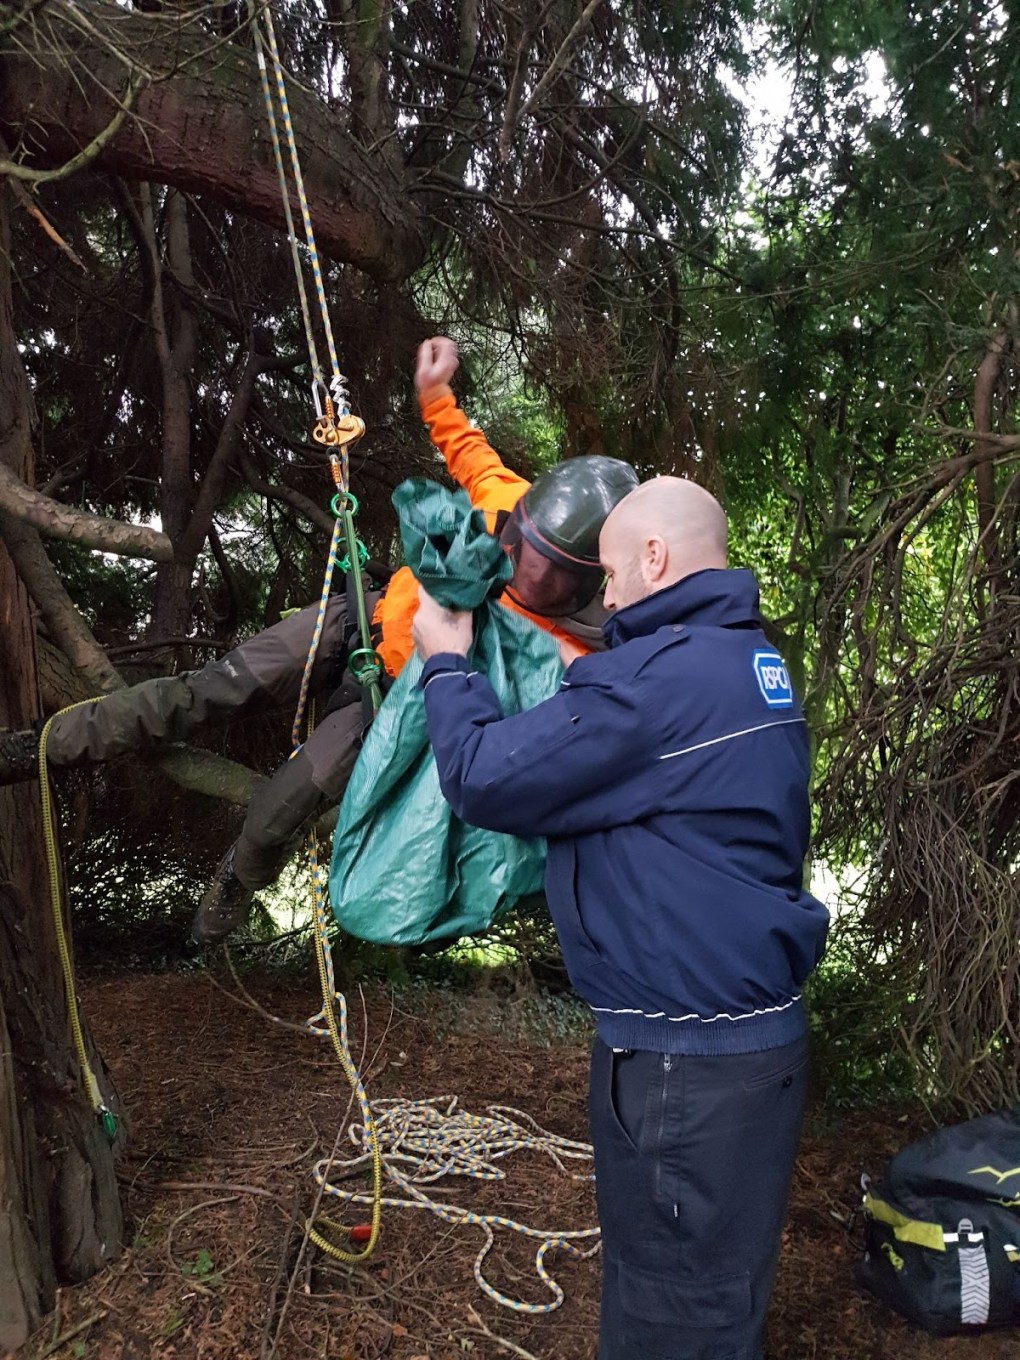 Tree Surgeon Rescues Cat Stuck in 60ft Tree in High Winds